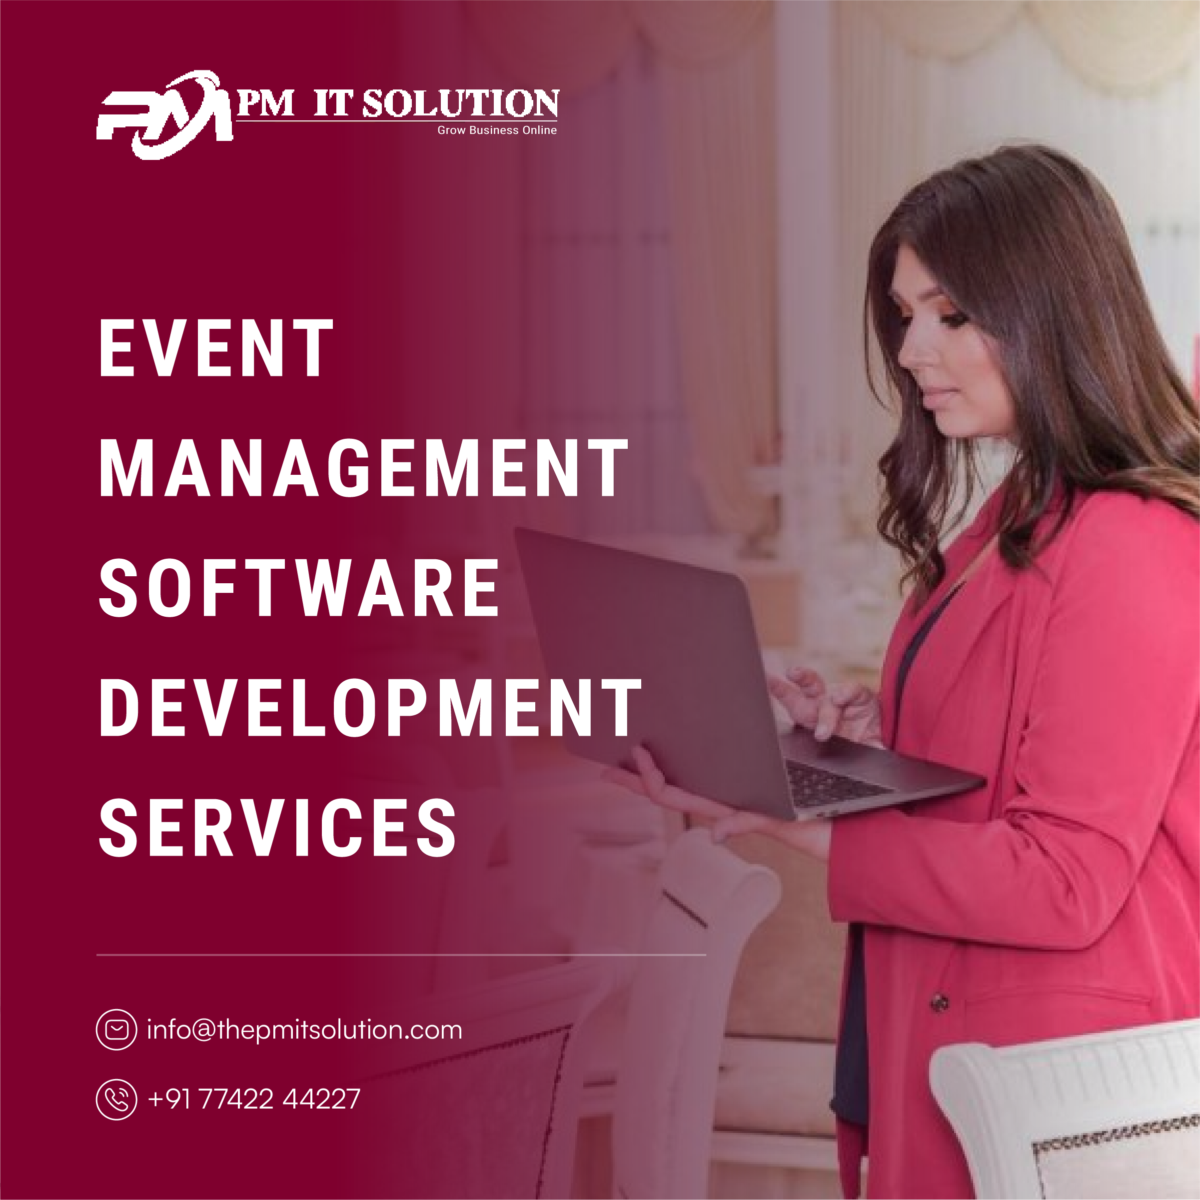 10 Tips for Choosing the Right Event Management Software Development Company